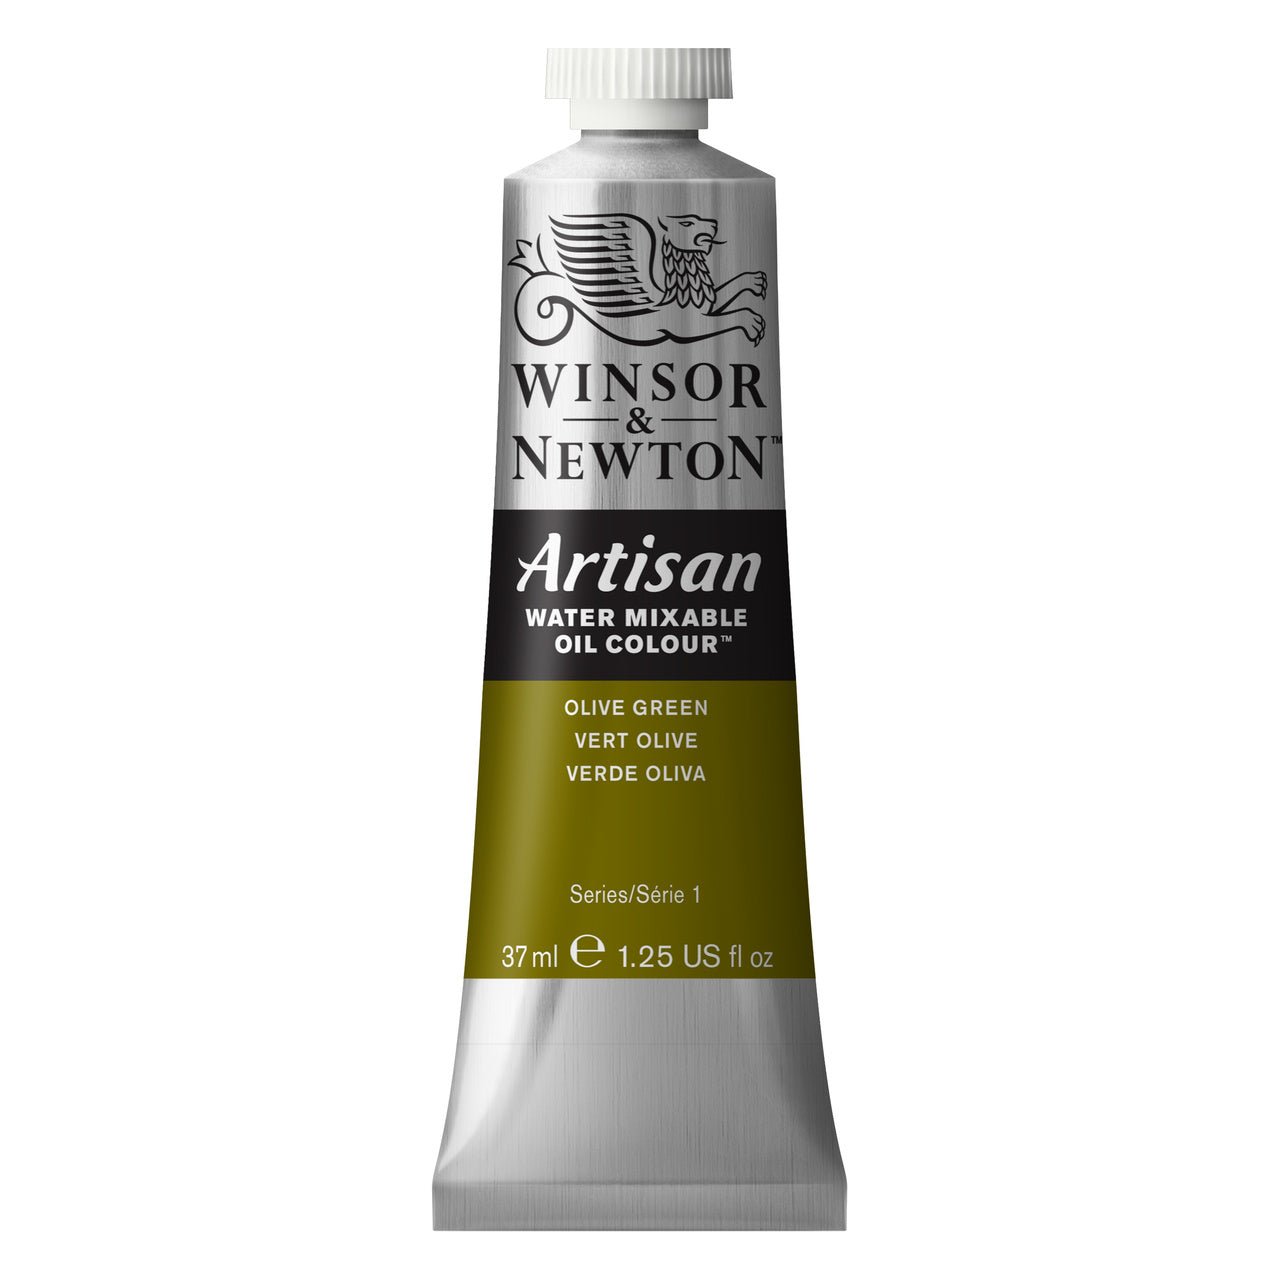 Winsor & Newton Artisan Water Mixable Oil 37ml - Olive Green - merriartist.com